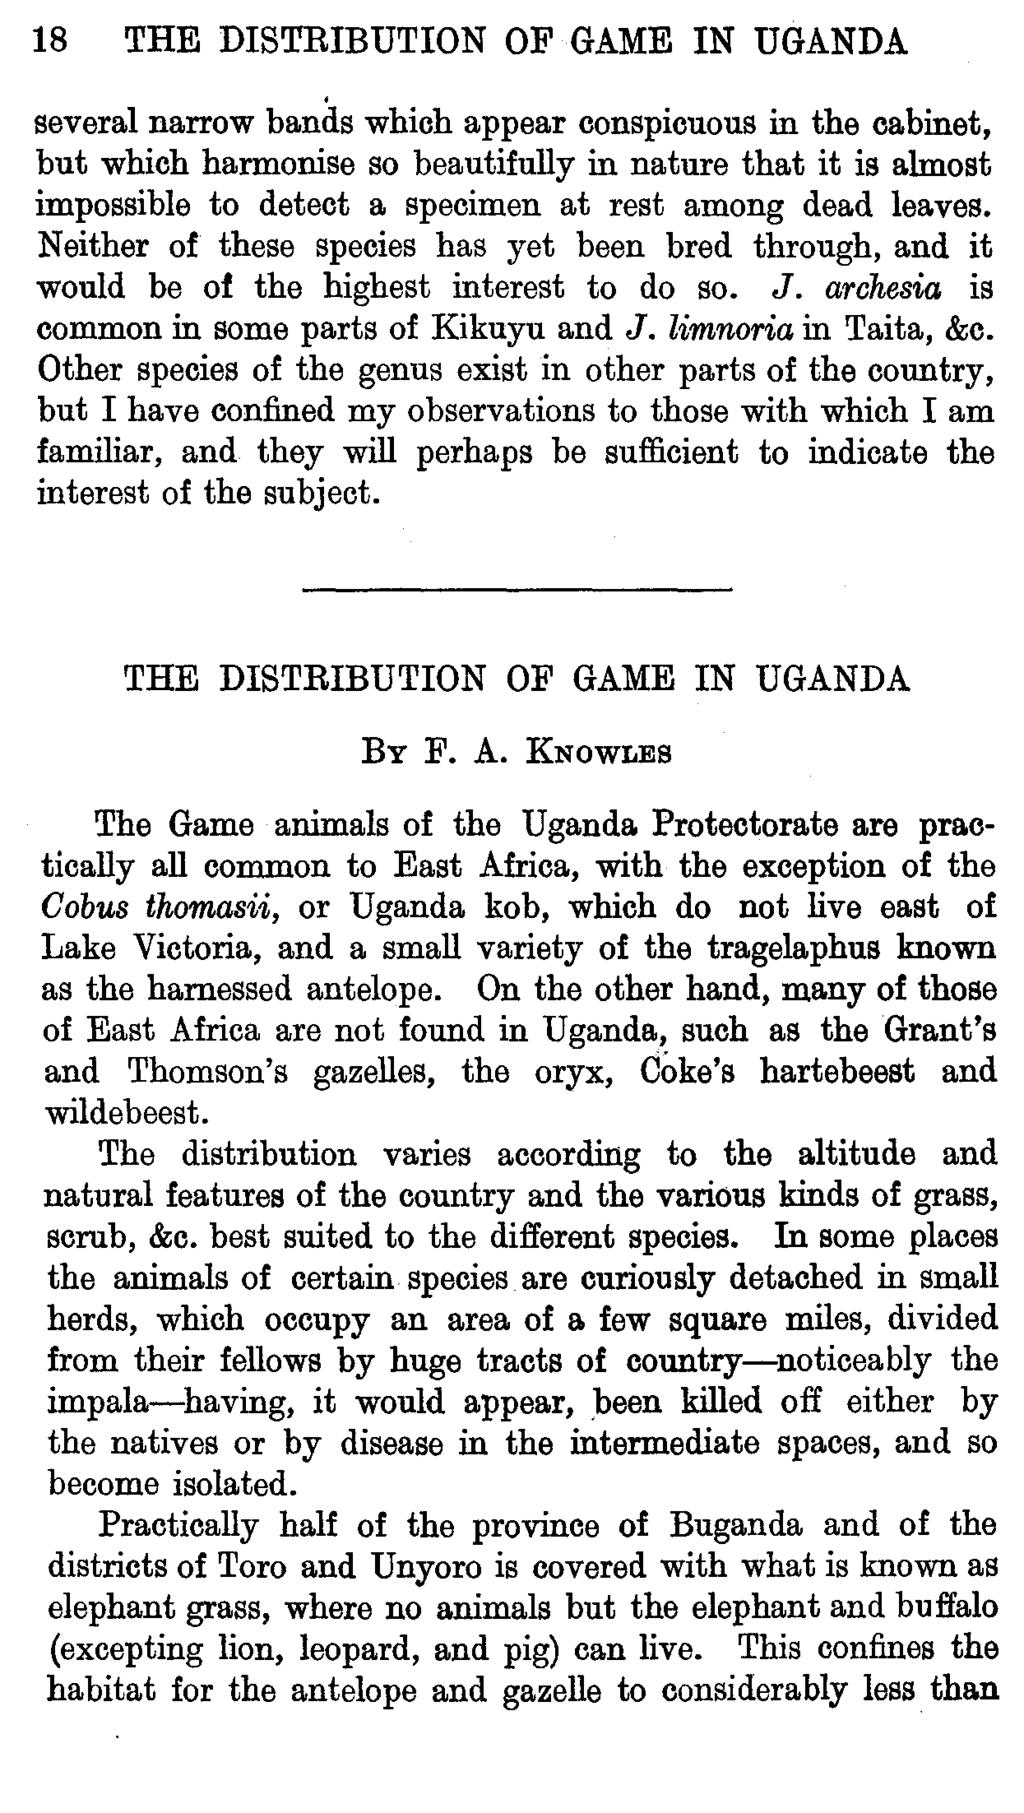 18 THE DISTRIBUTION OF GAME IN UGANDA several narrow bands whioh appear conspiouous in the cabinet, but whioh harmonise so beautifully in nature that it is almost impossible to deteot a speoimen at